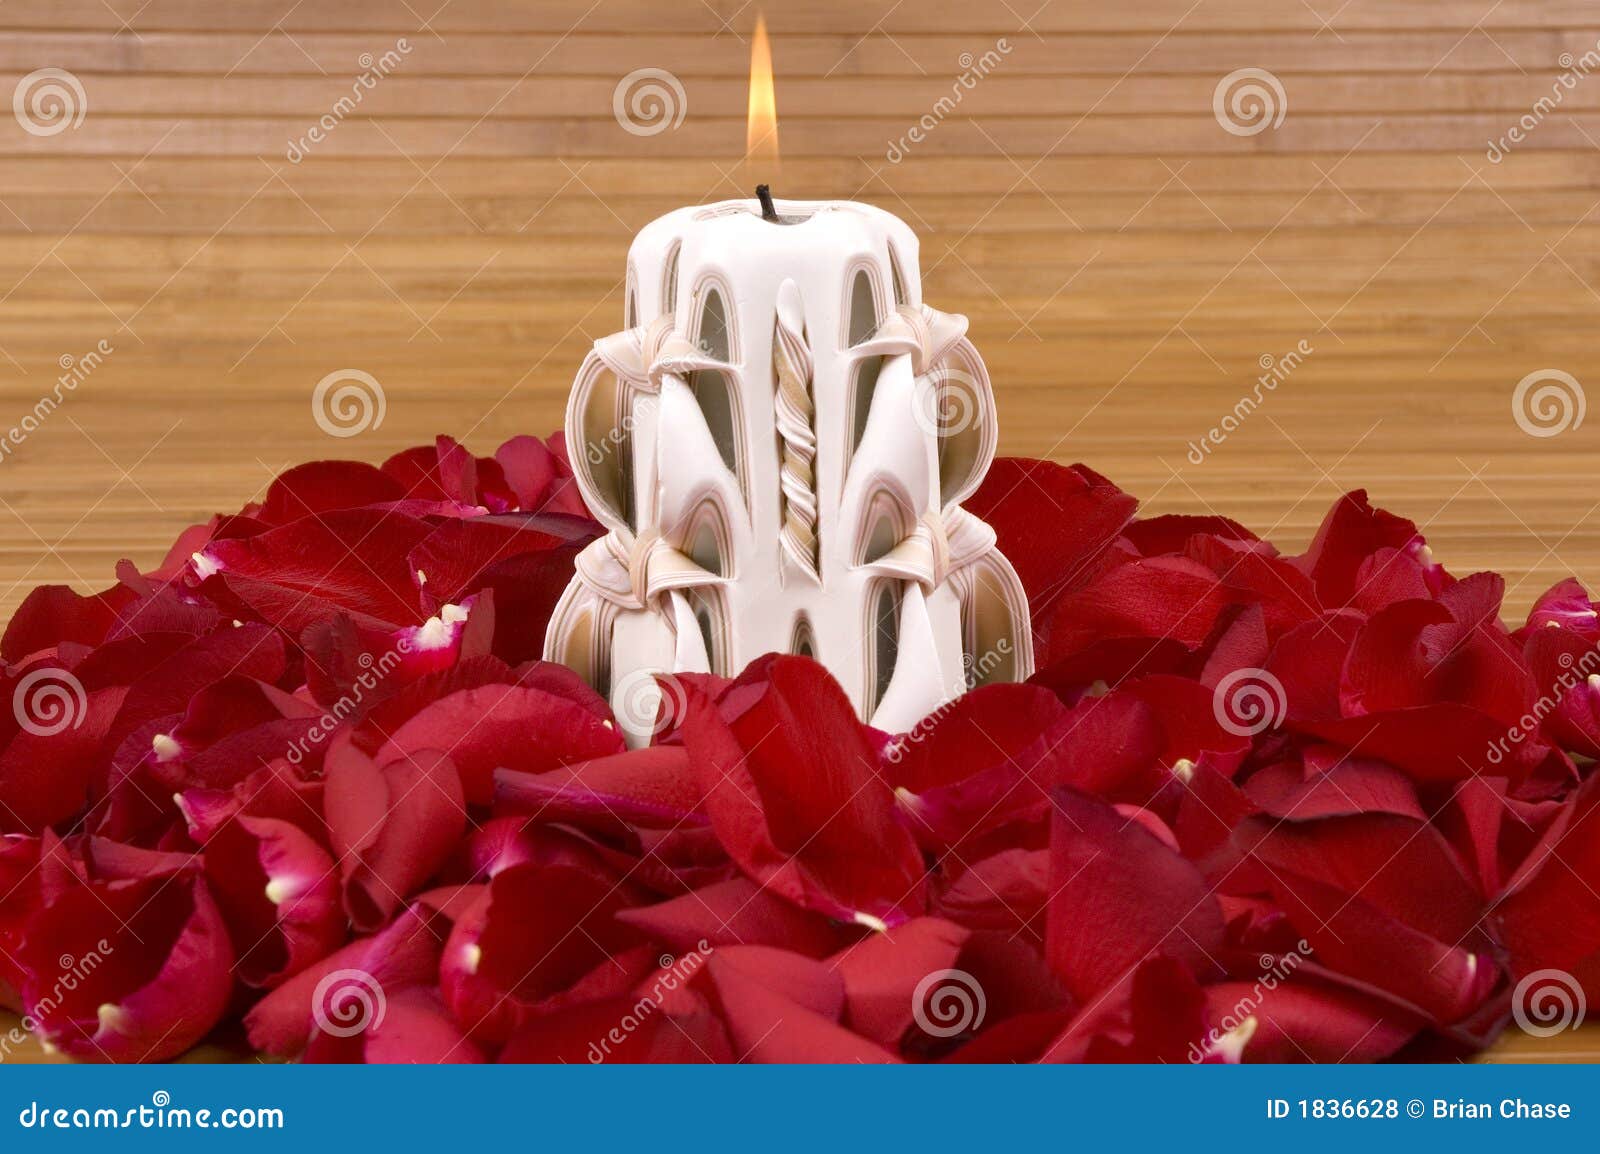 Fragrant candle and hundreds of romantic red rose petals